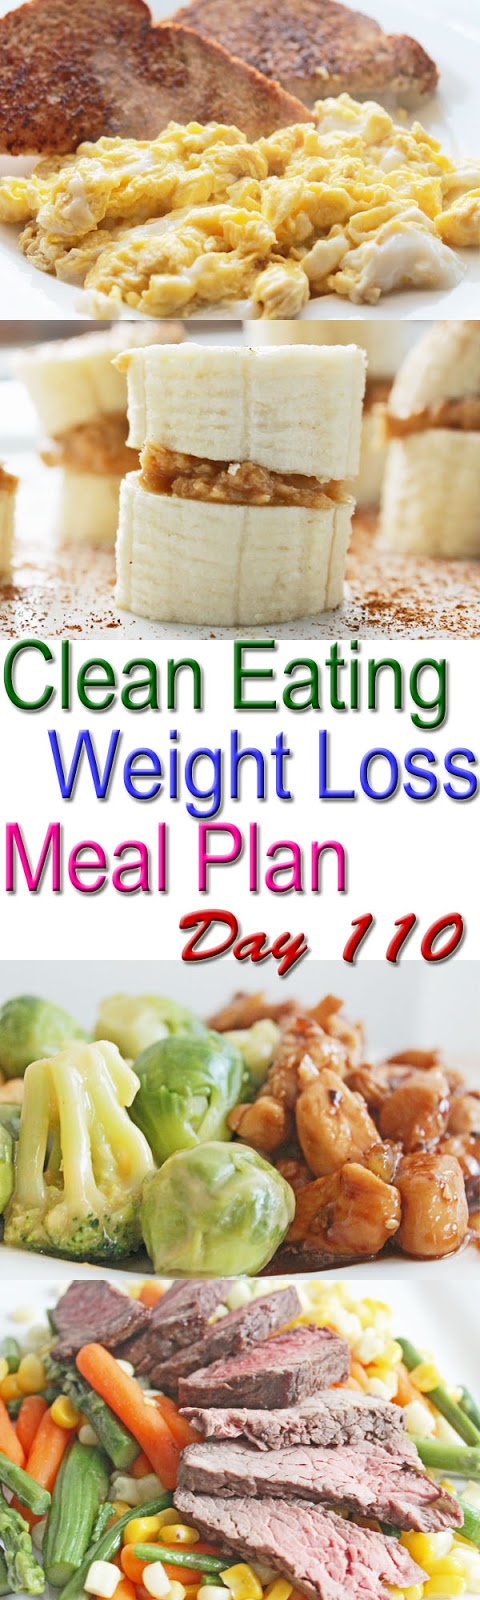 Clean Eating Weight Loss Meal Plan 110 | Clean Eating Meal ...